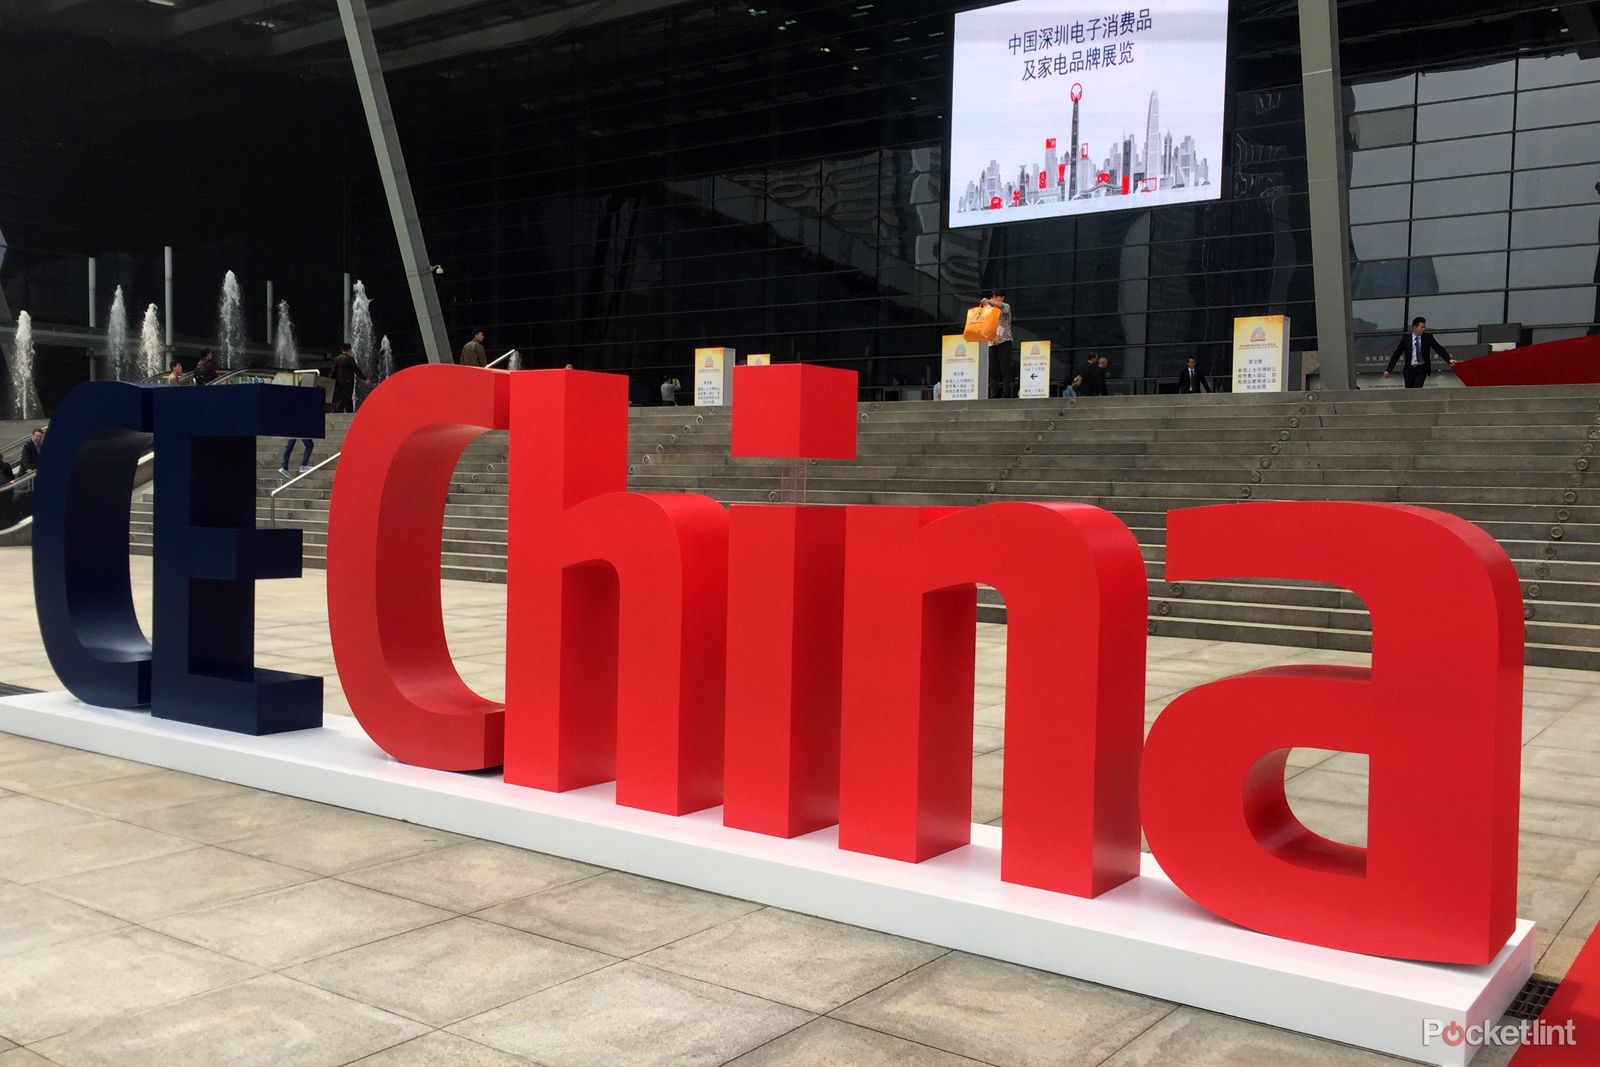 ce china east meets west in consumer tech fest image 1